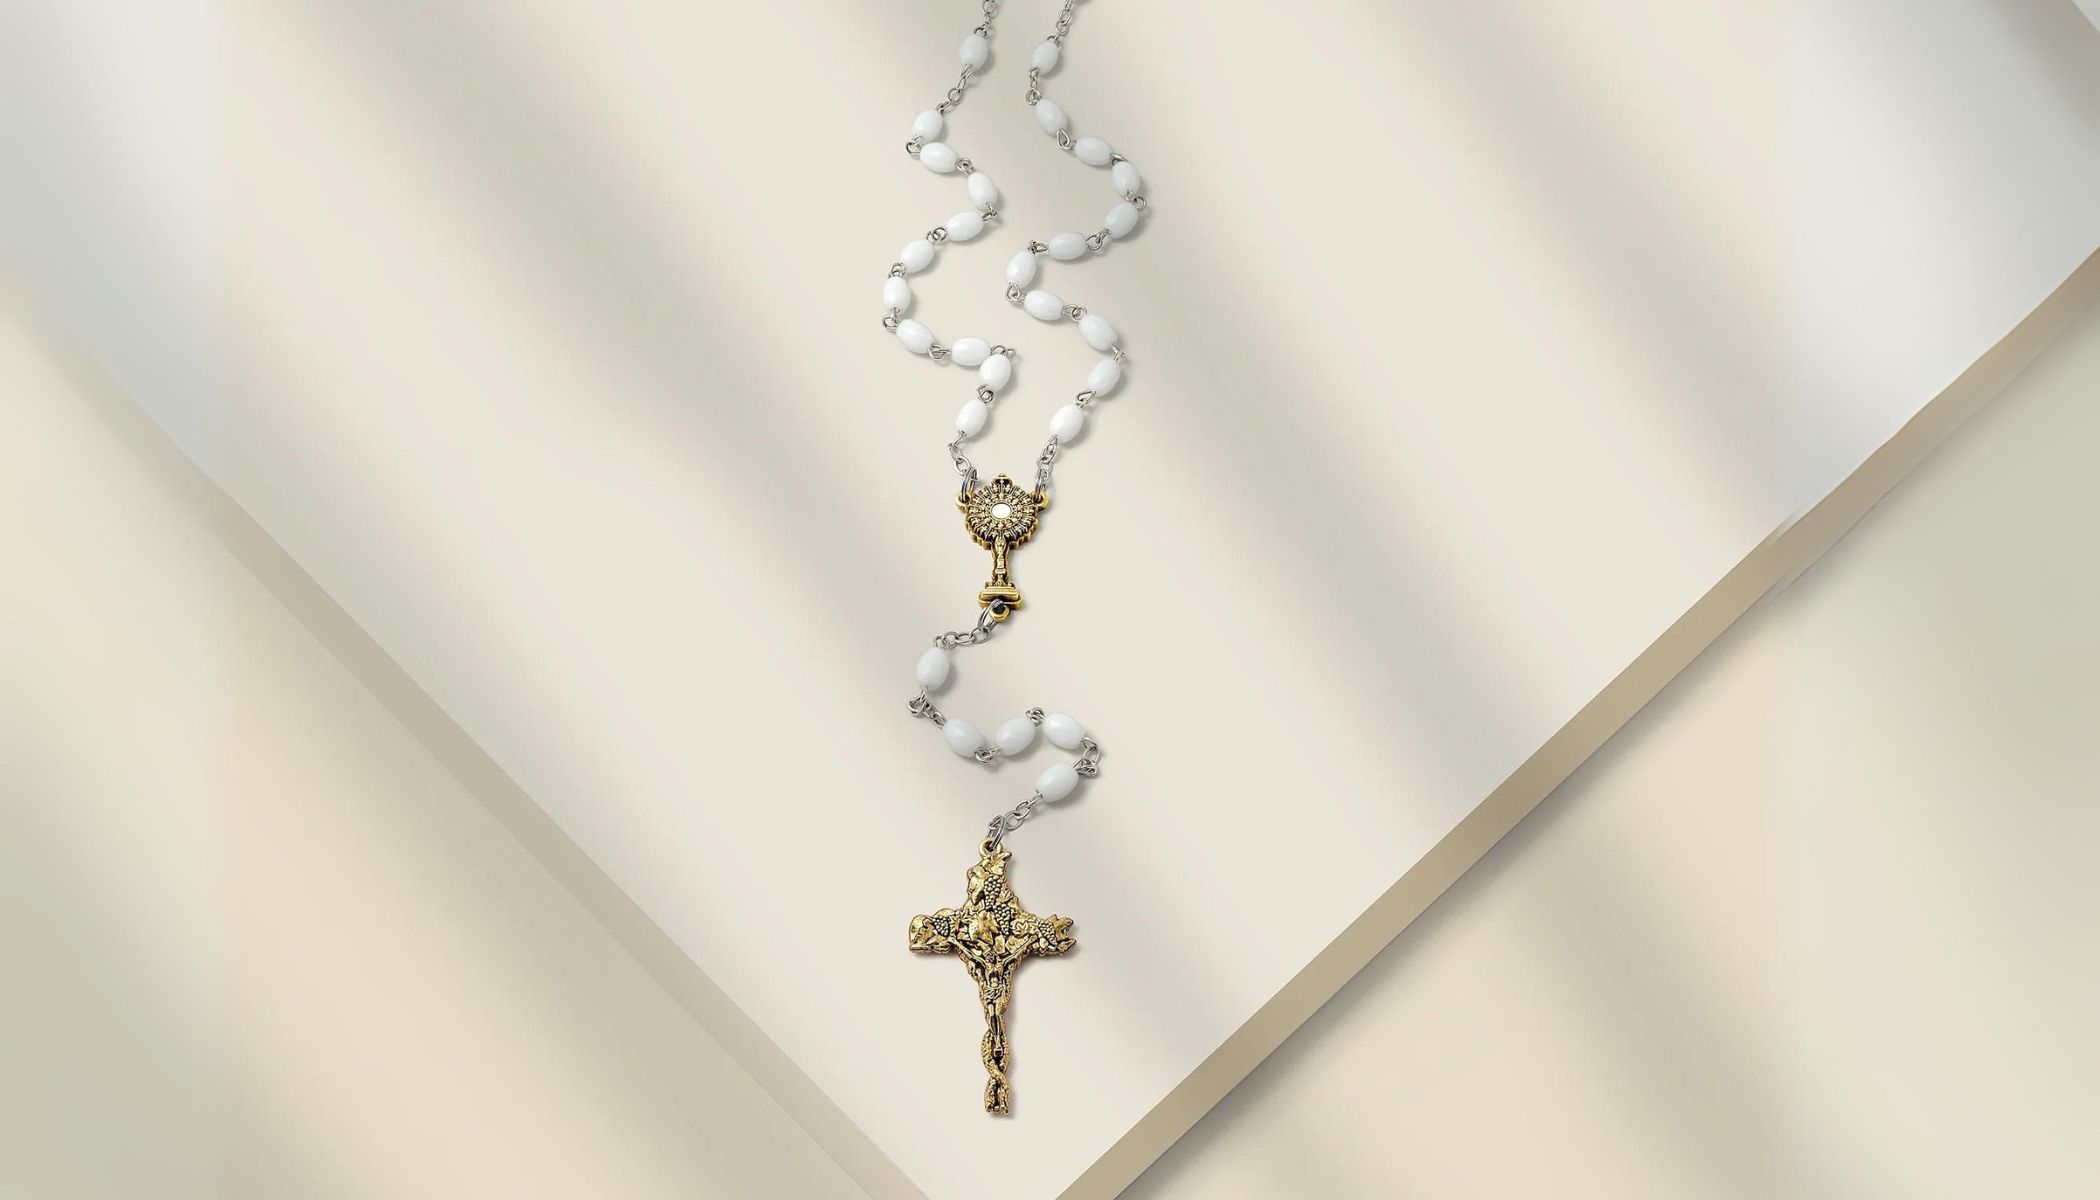 Maker of rosary for 2024 National Eucharistic Congress hopes to inspire Eucharistic devotion thumbnail